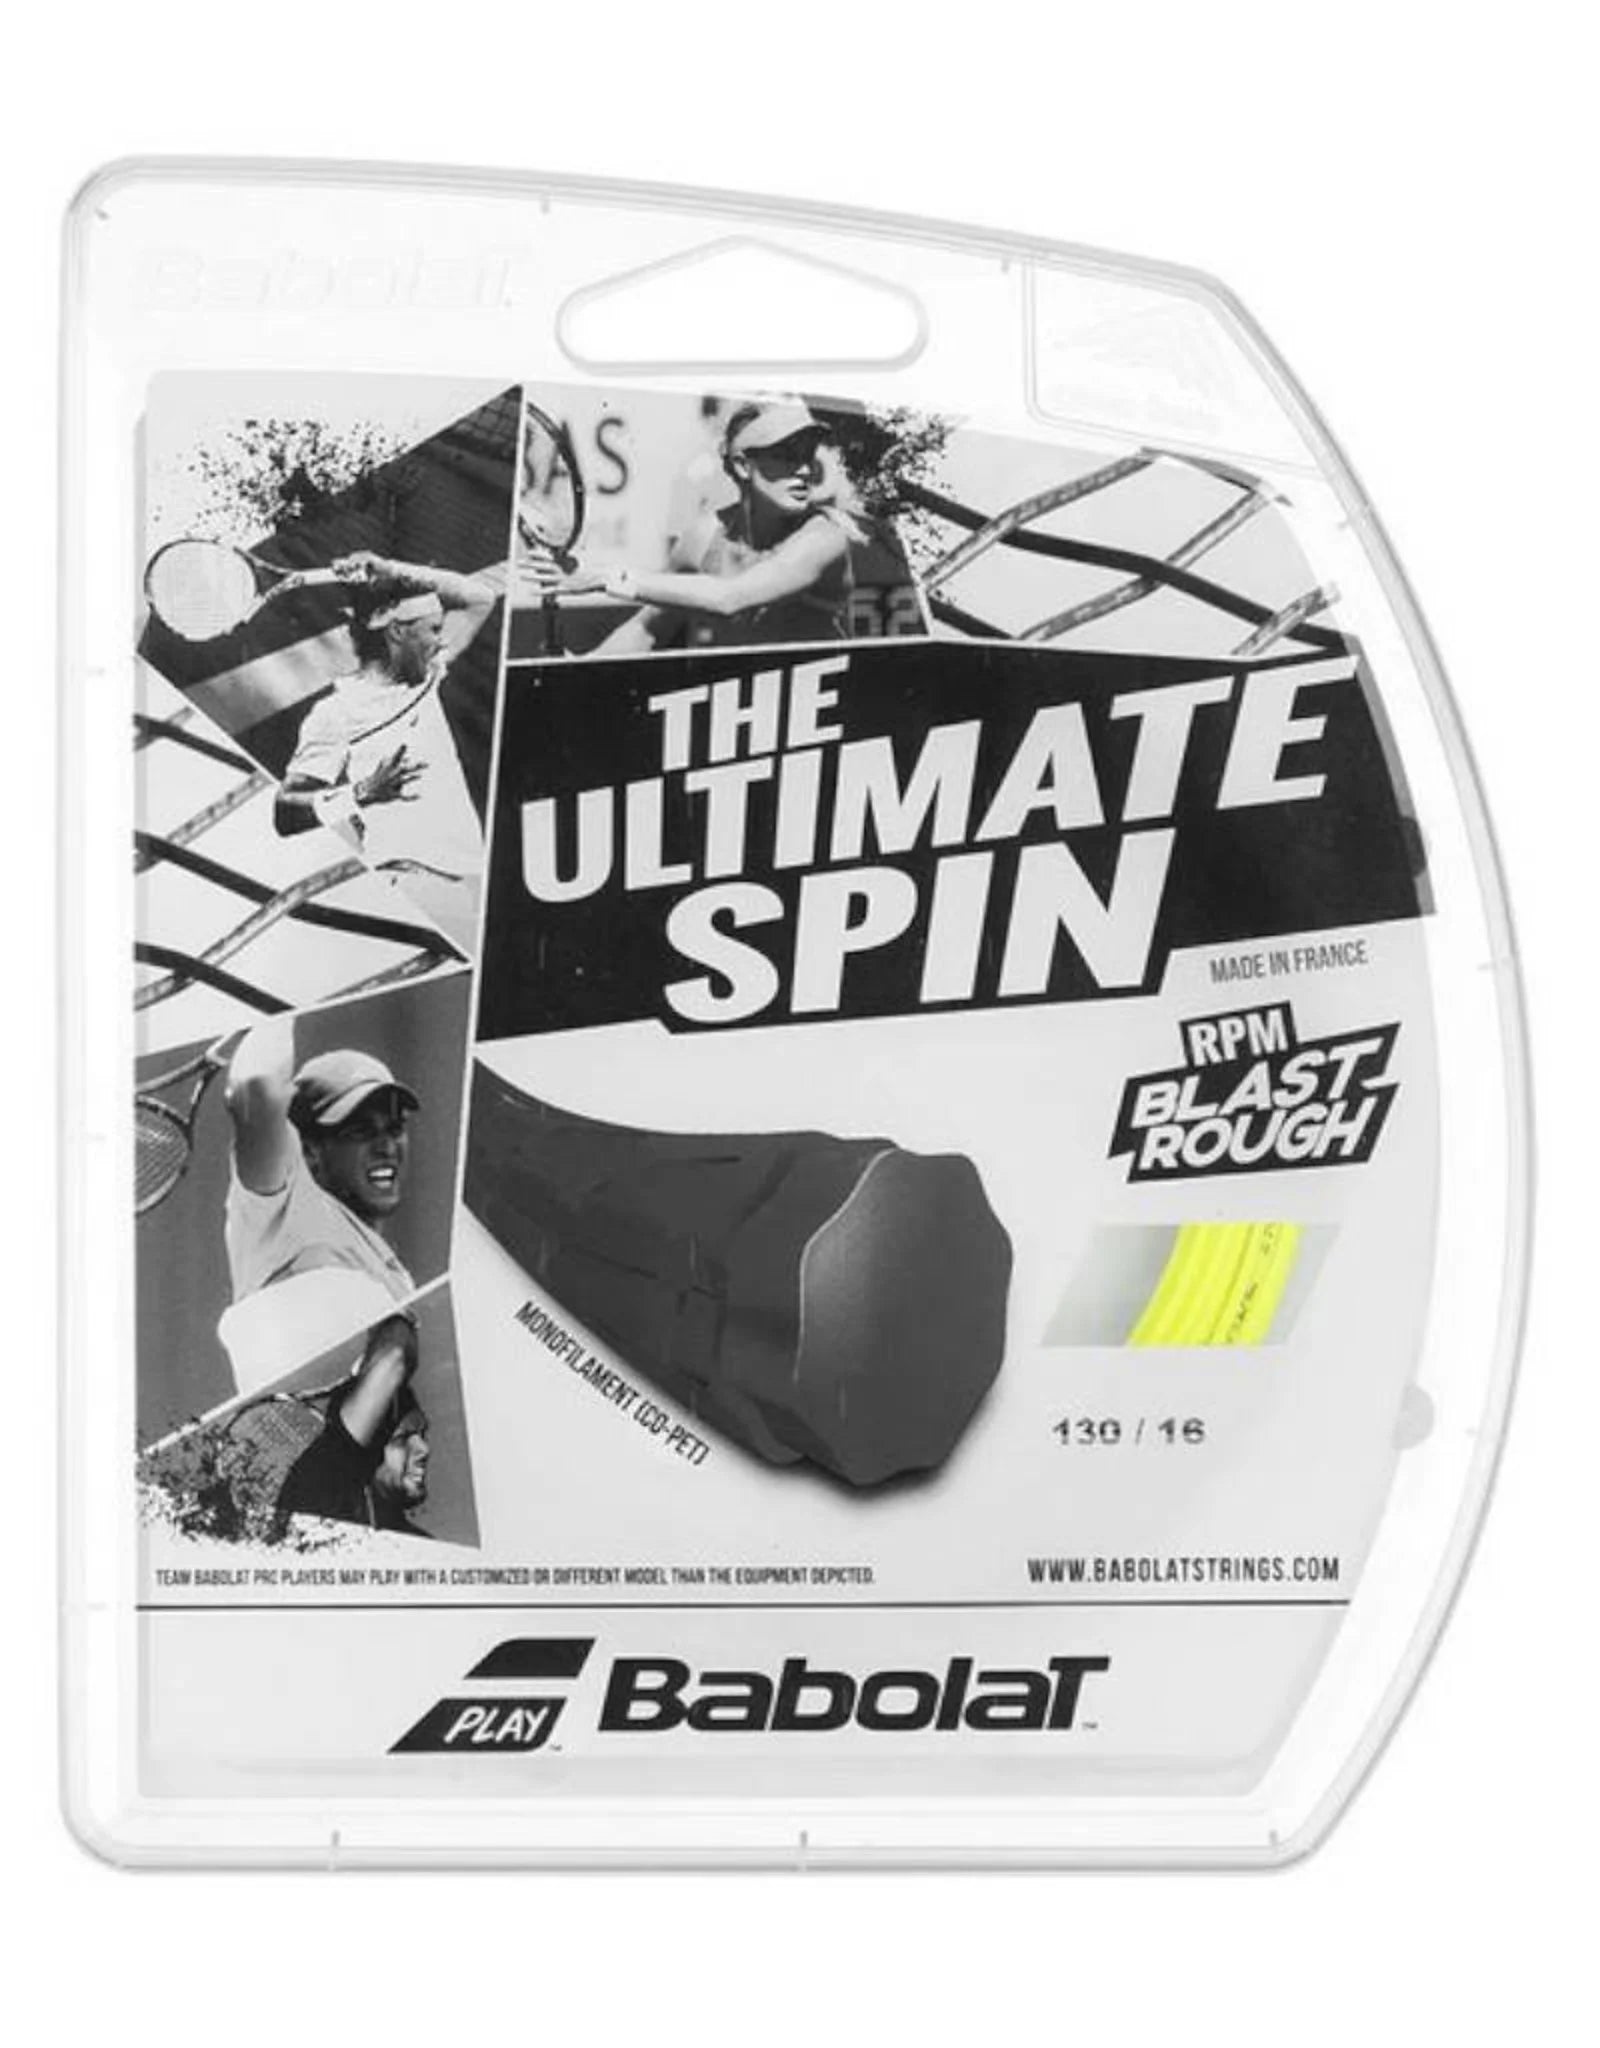 Babolat "The Ultimate Spin" RPM Blast Rough String